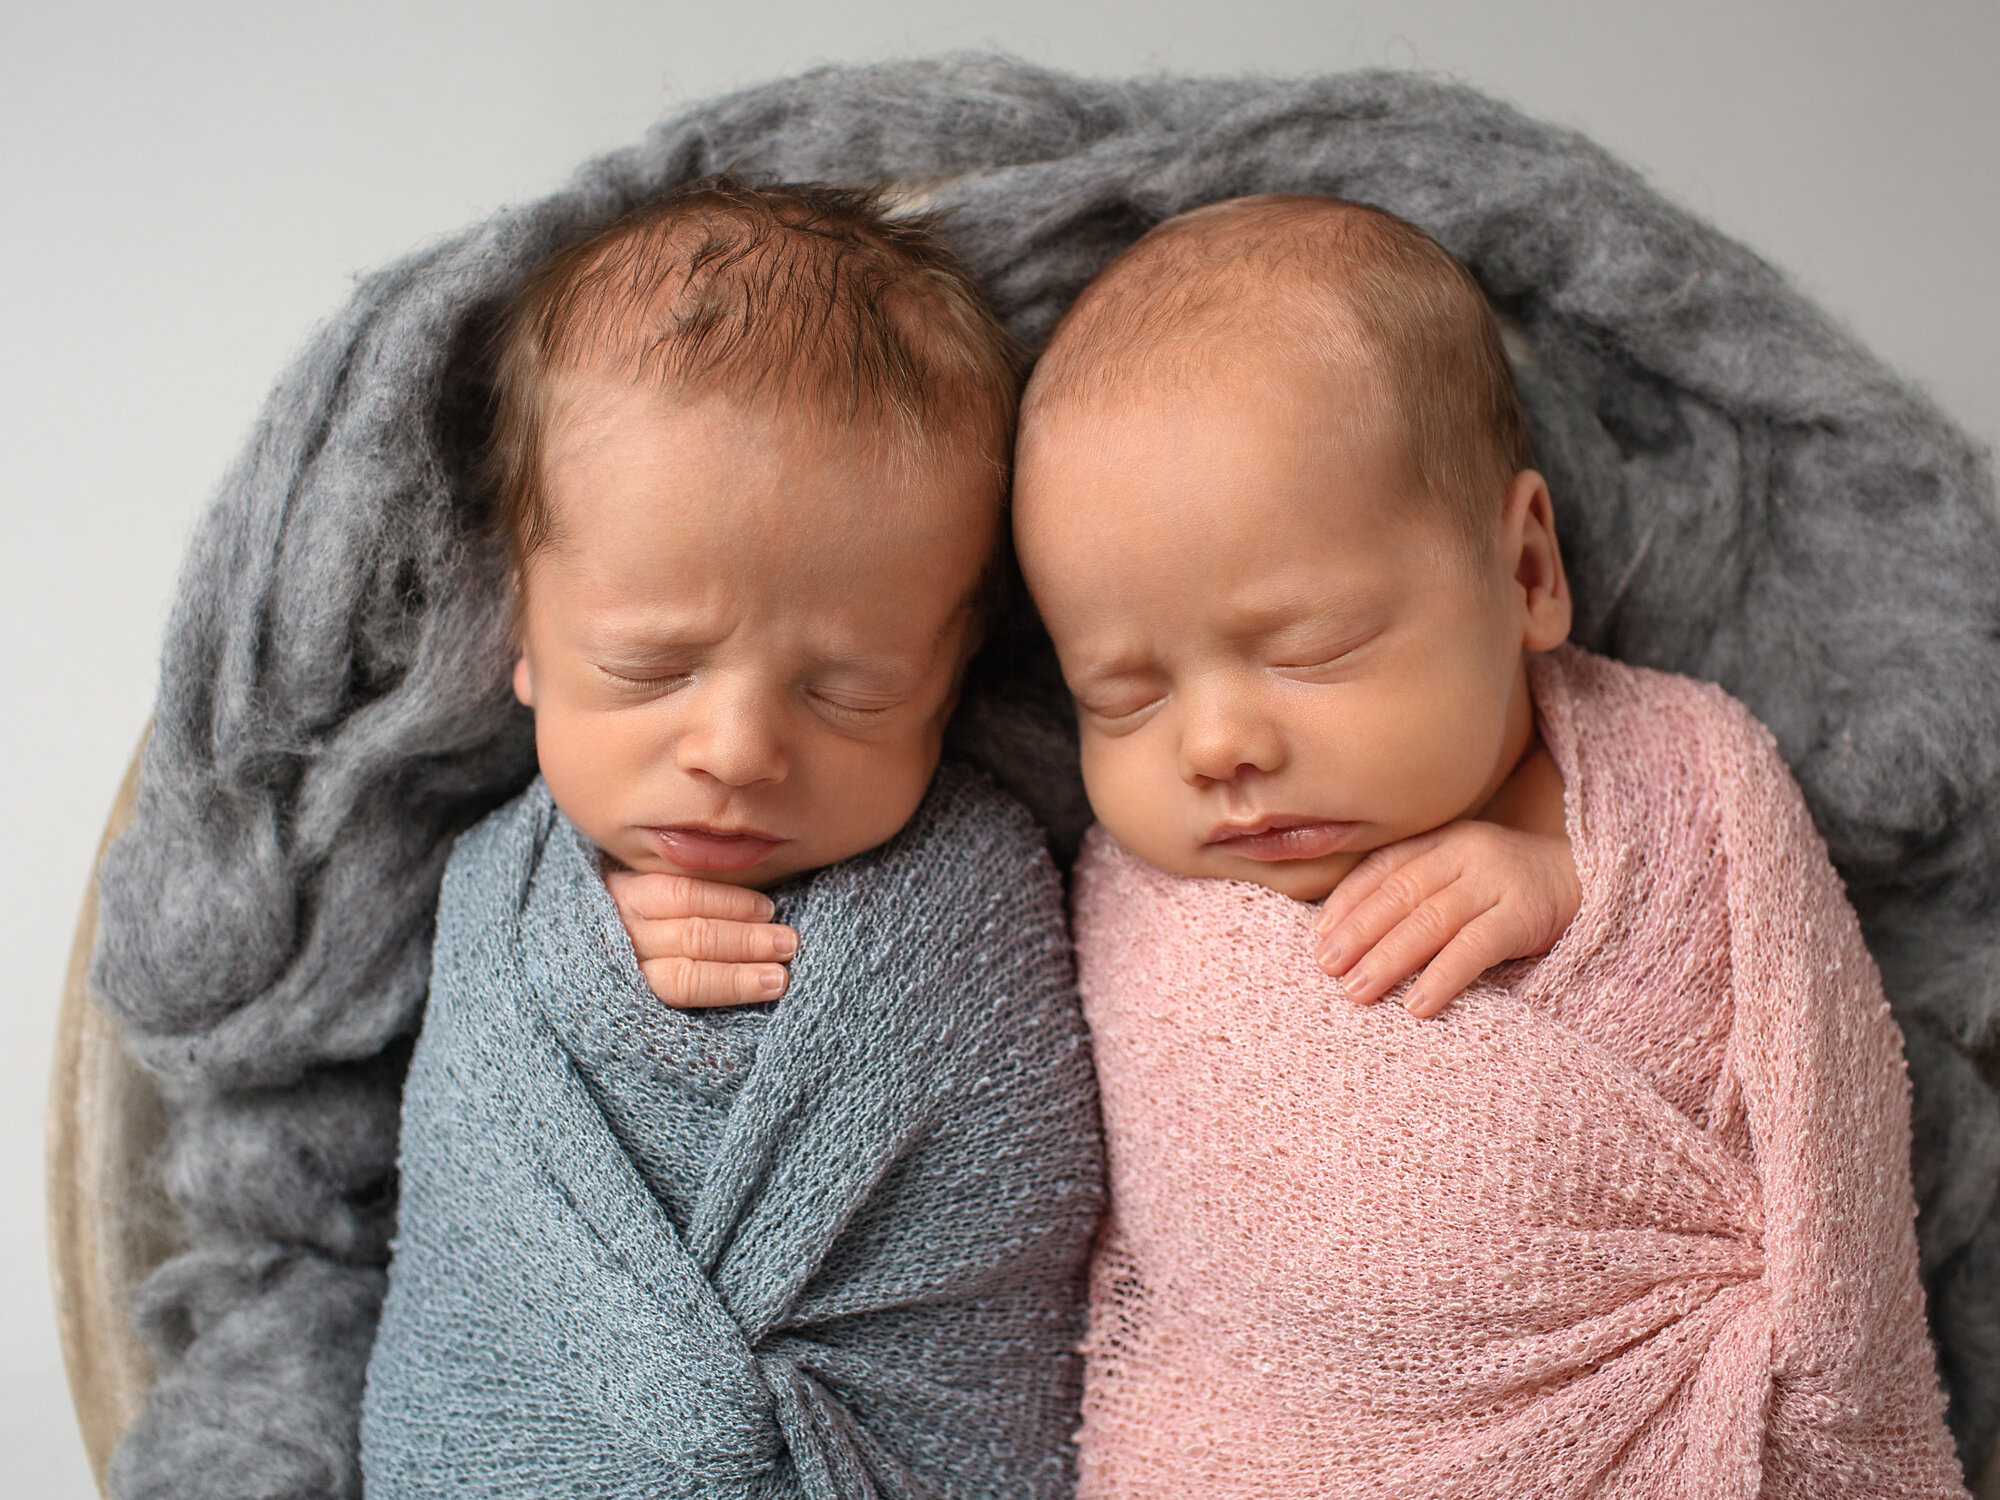 twin baby photographer caerphilly, south wales, cardiff